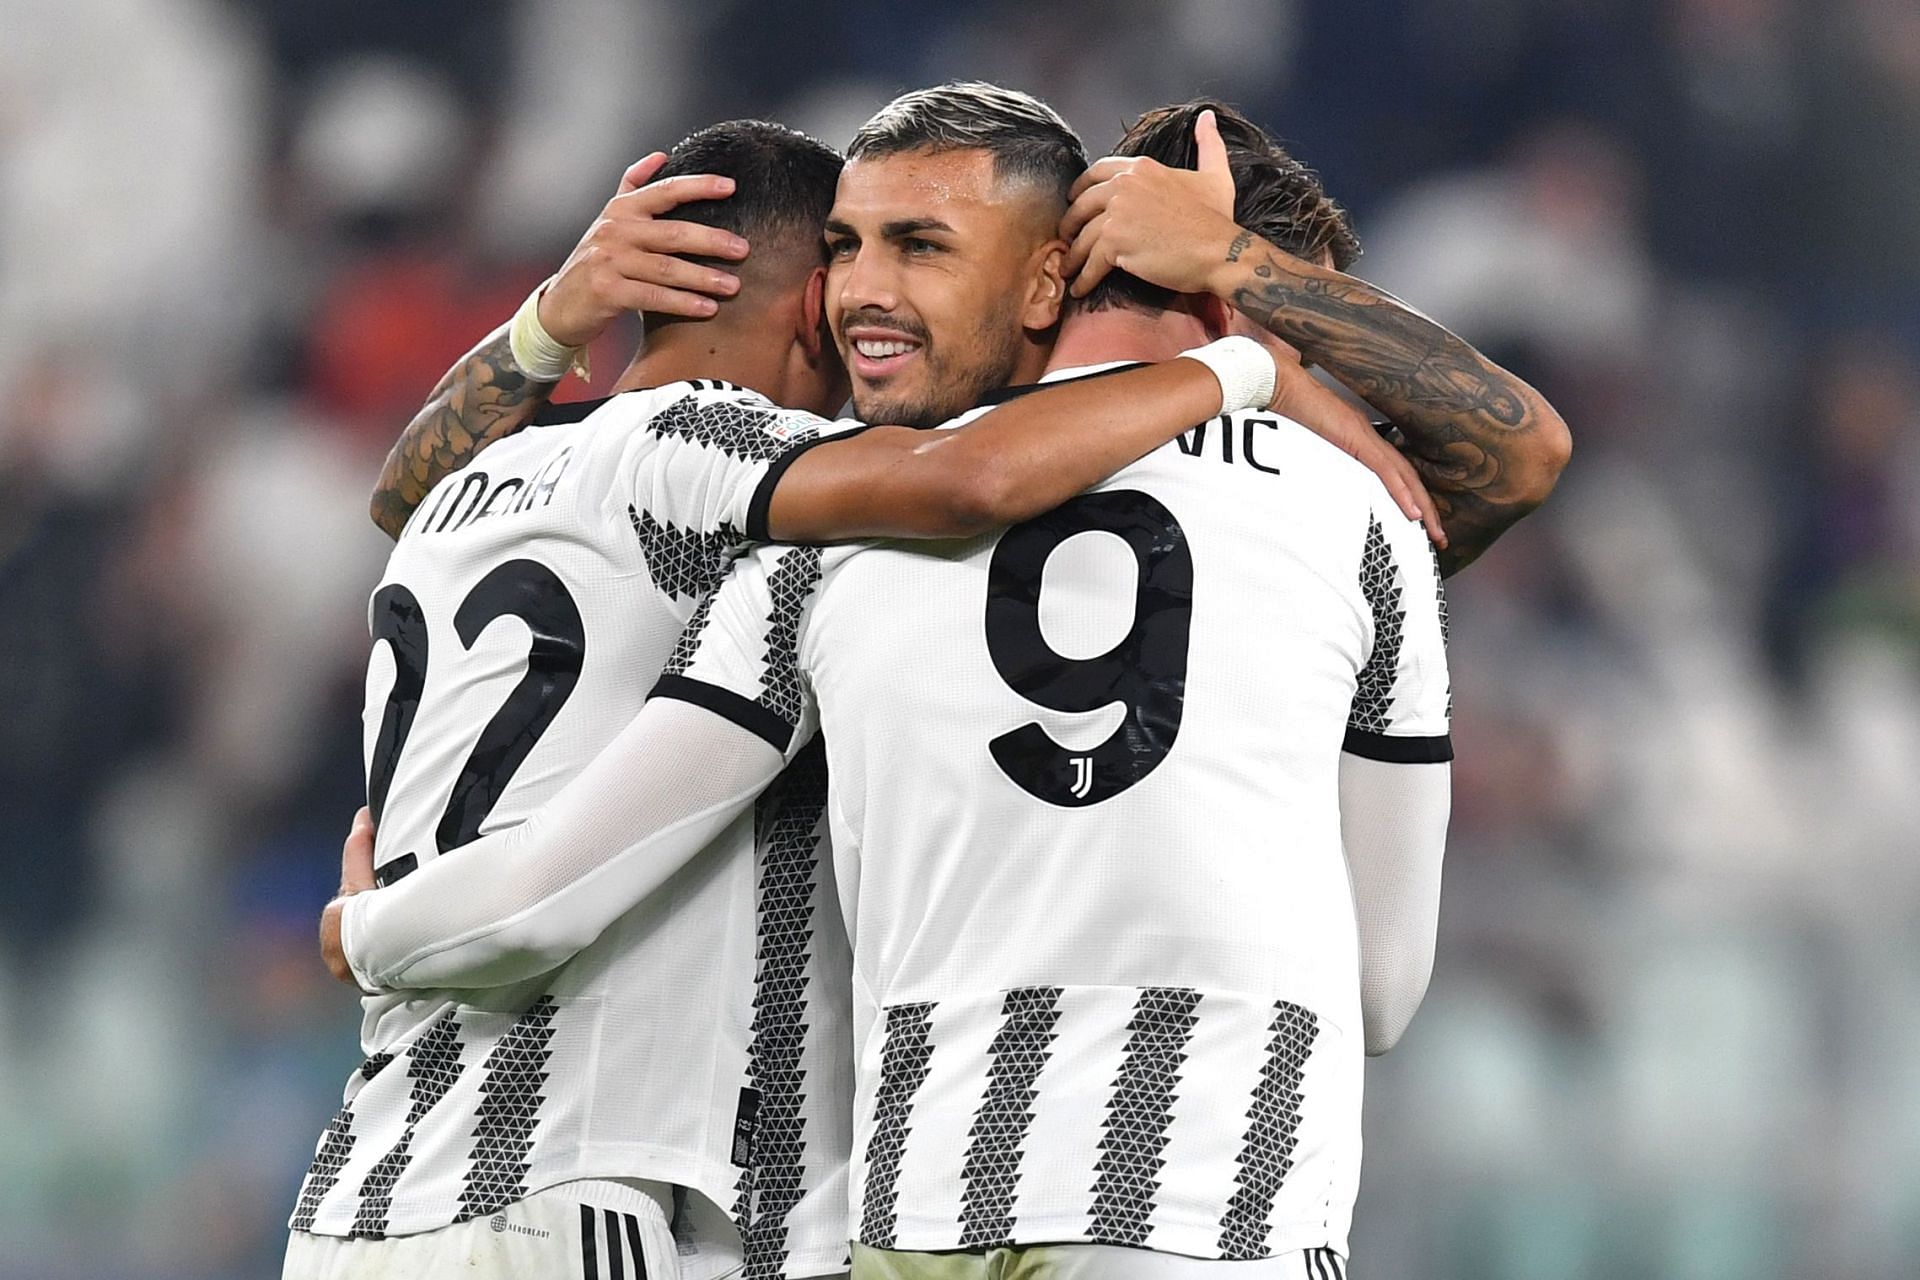 Juventus have a depleted squad this season